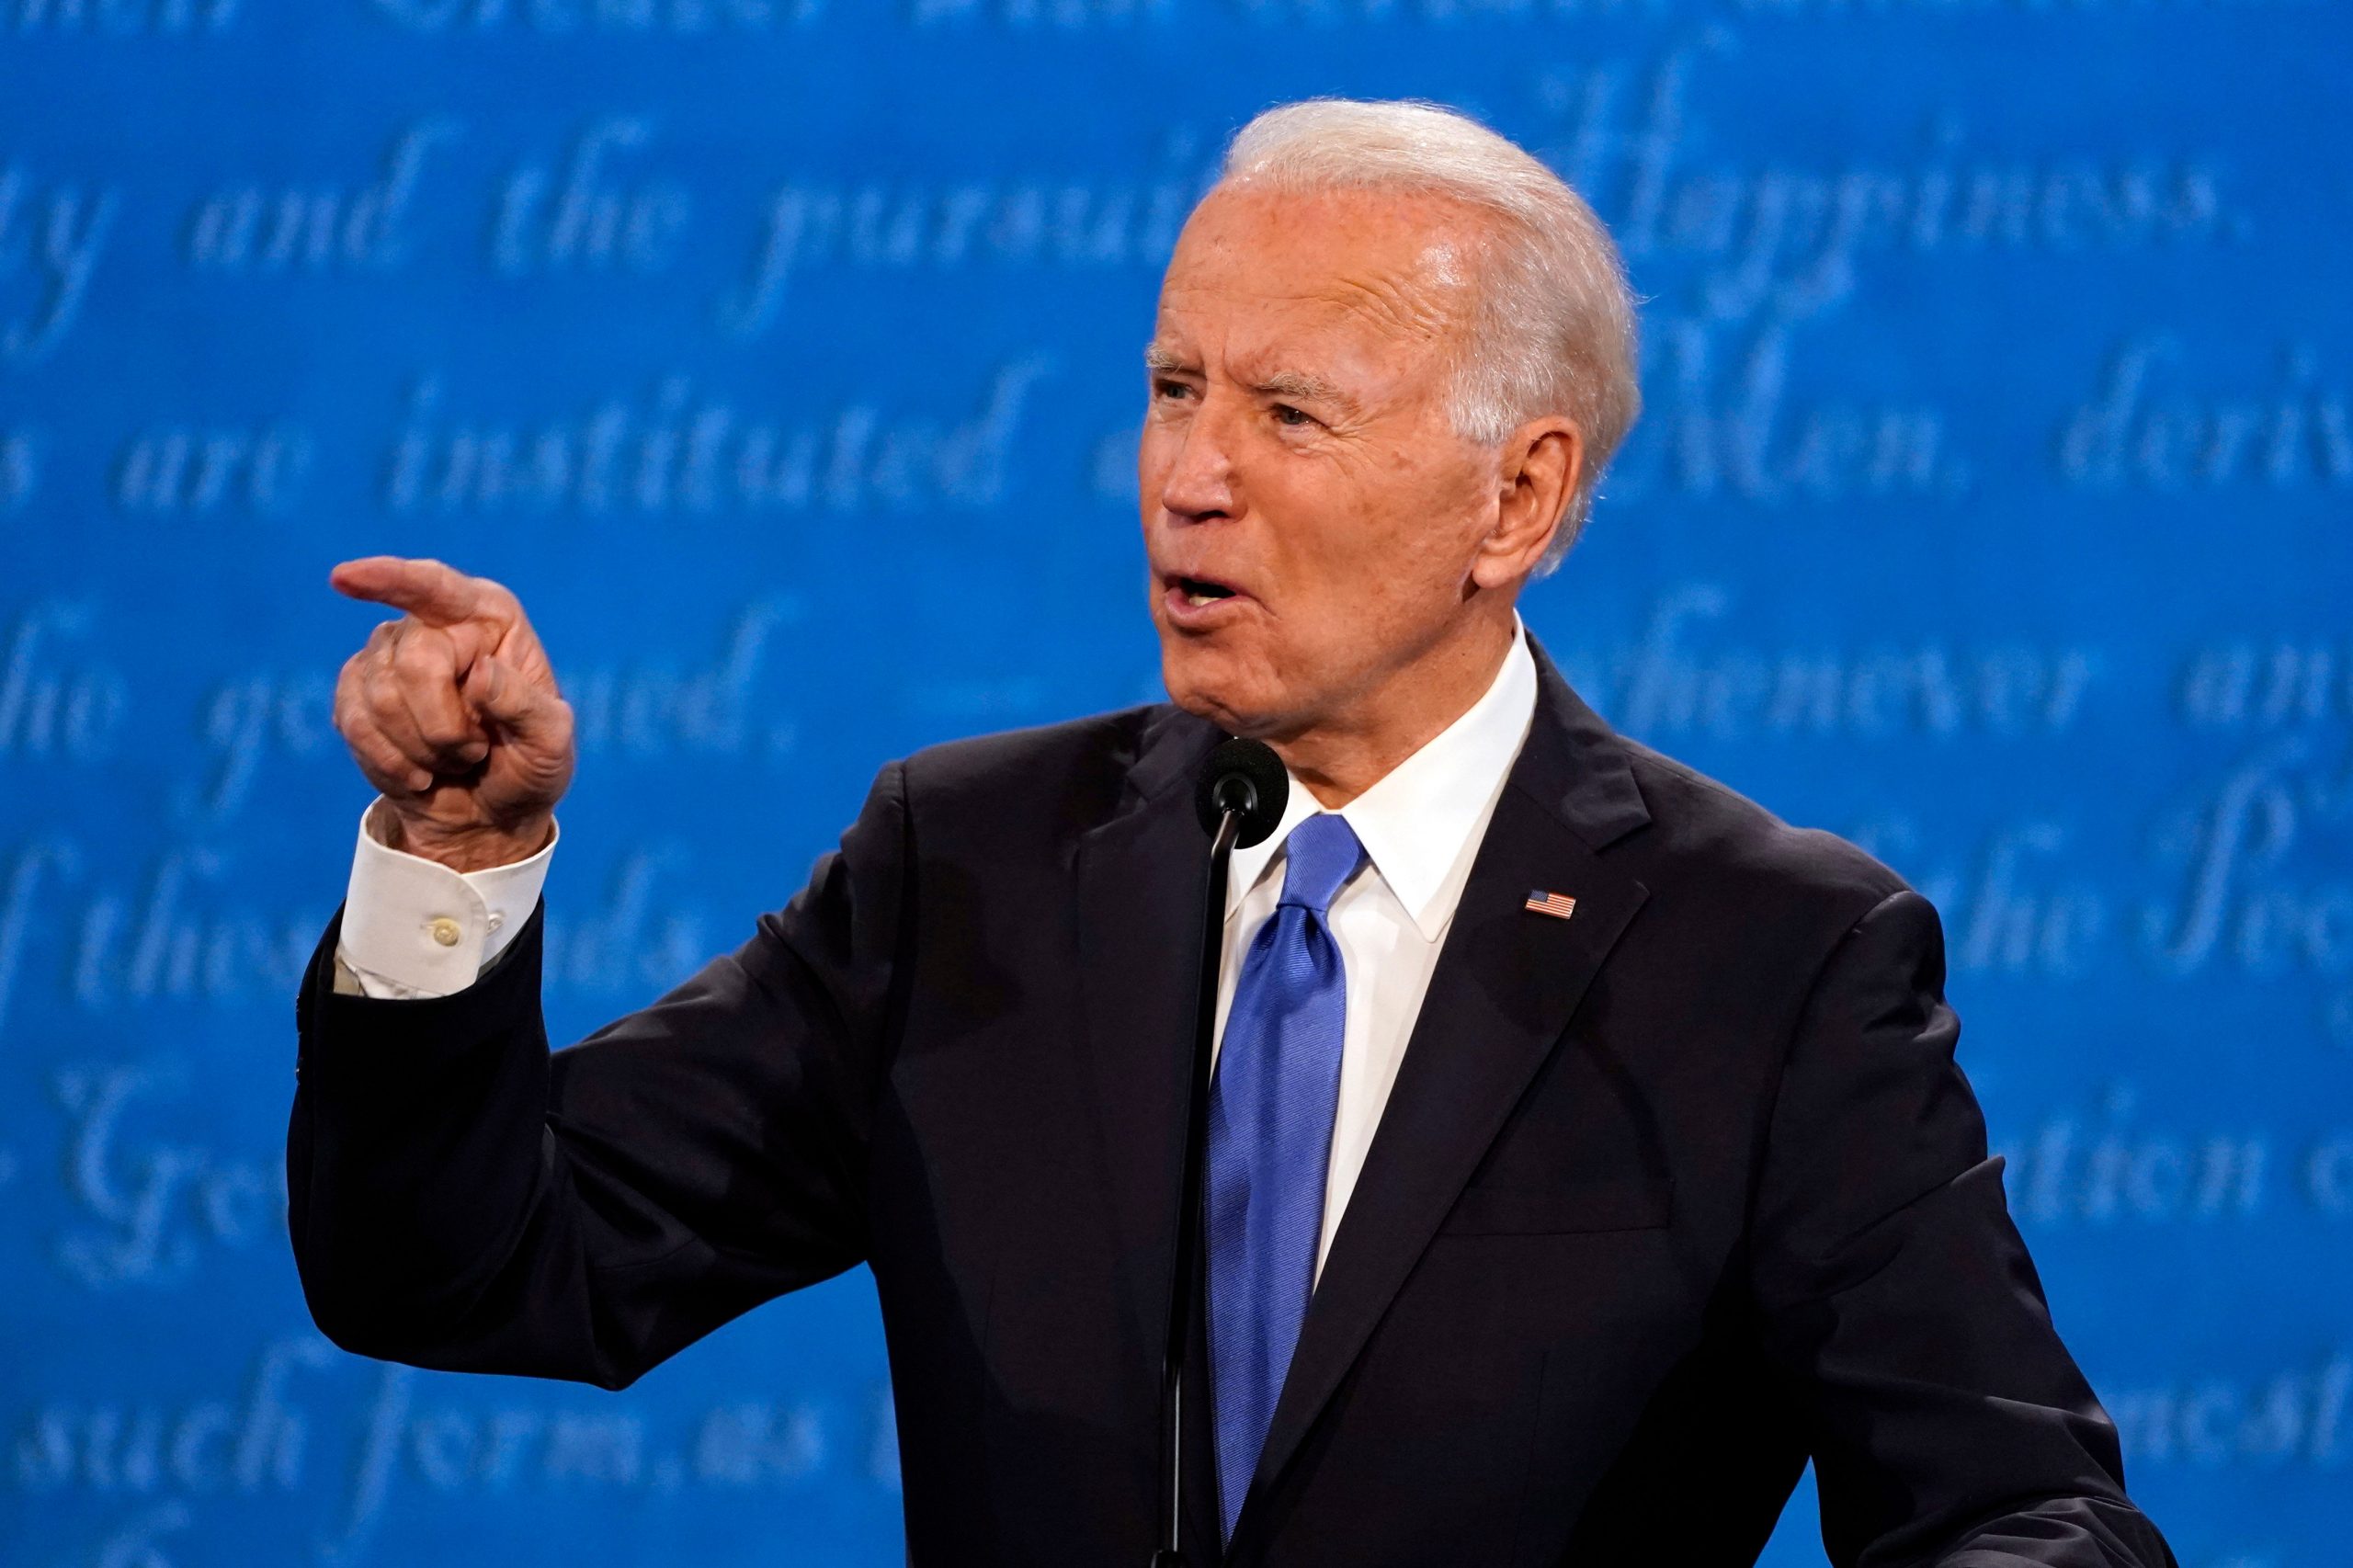 The route Joe Biden could take to reach the magic figure of 270 electoral votes